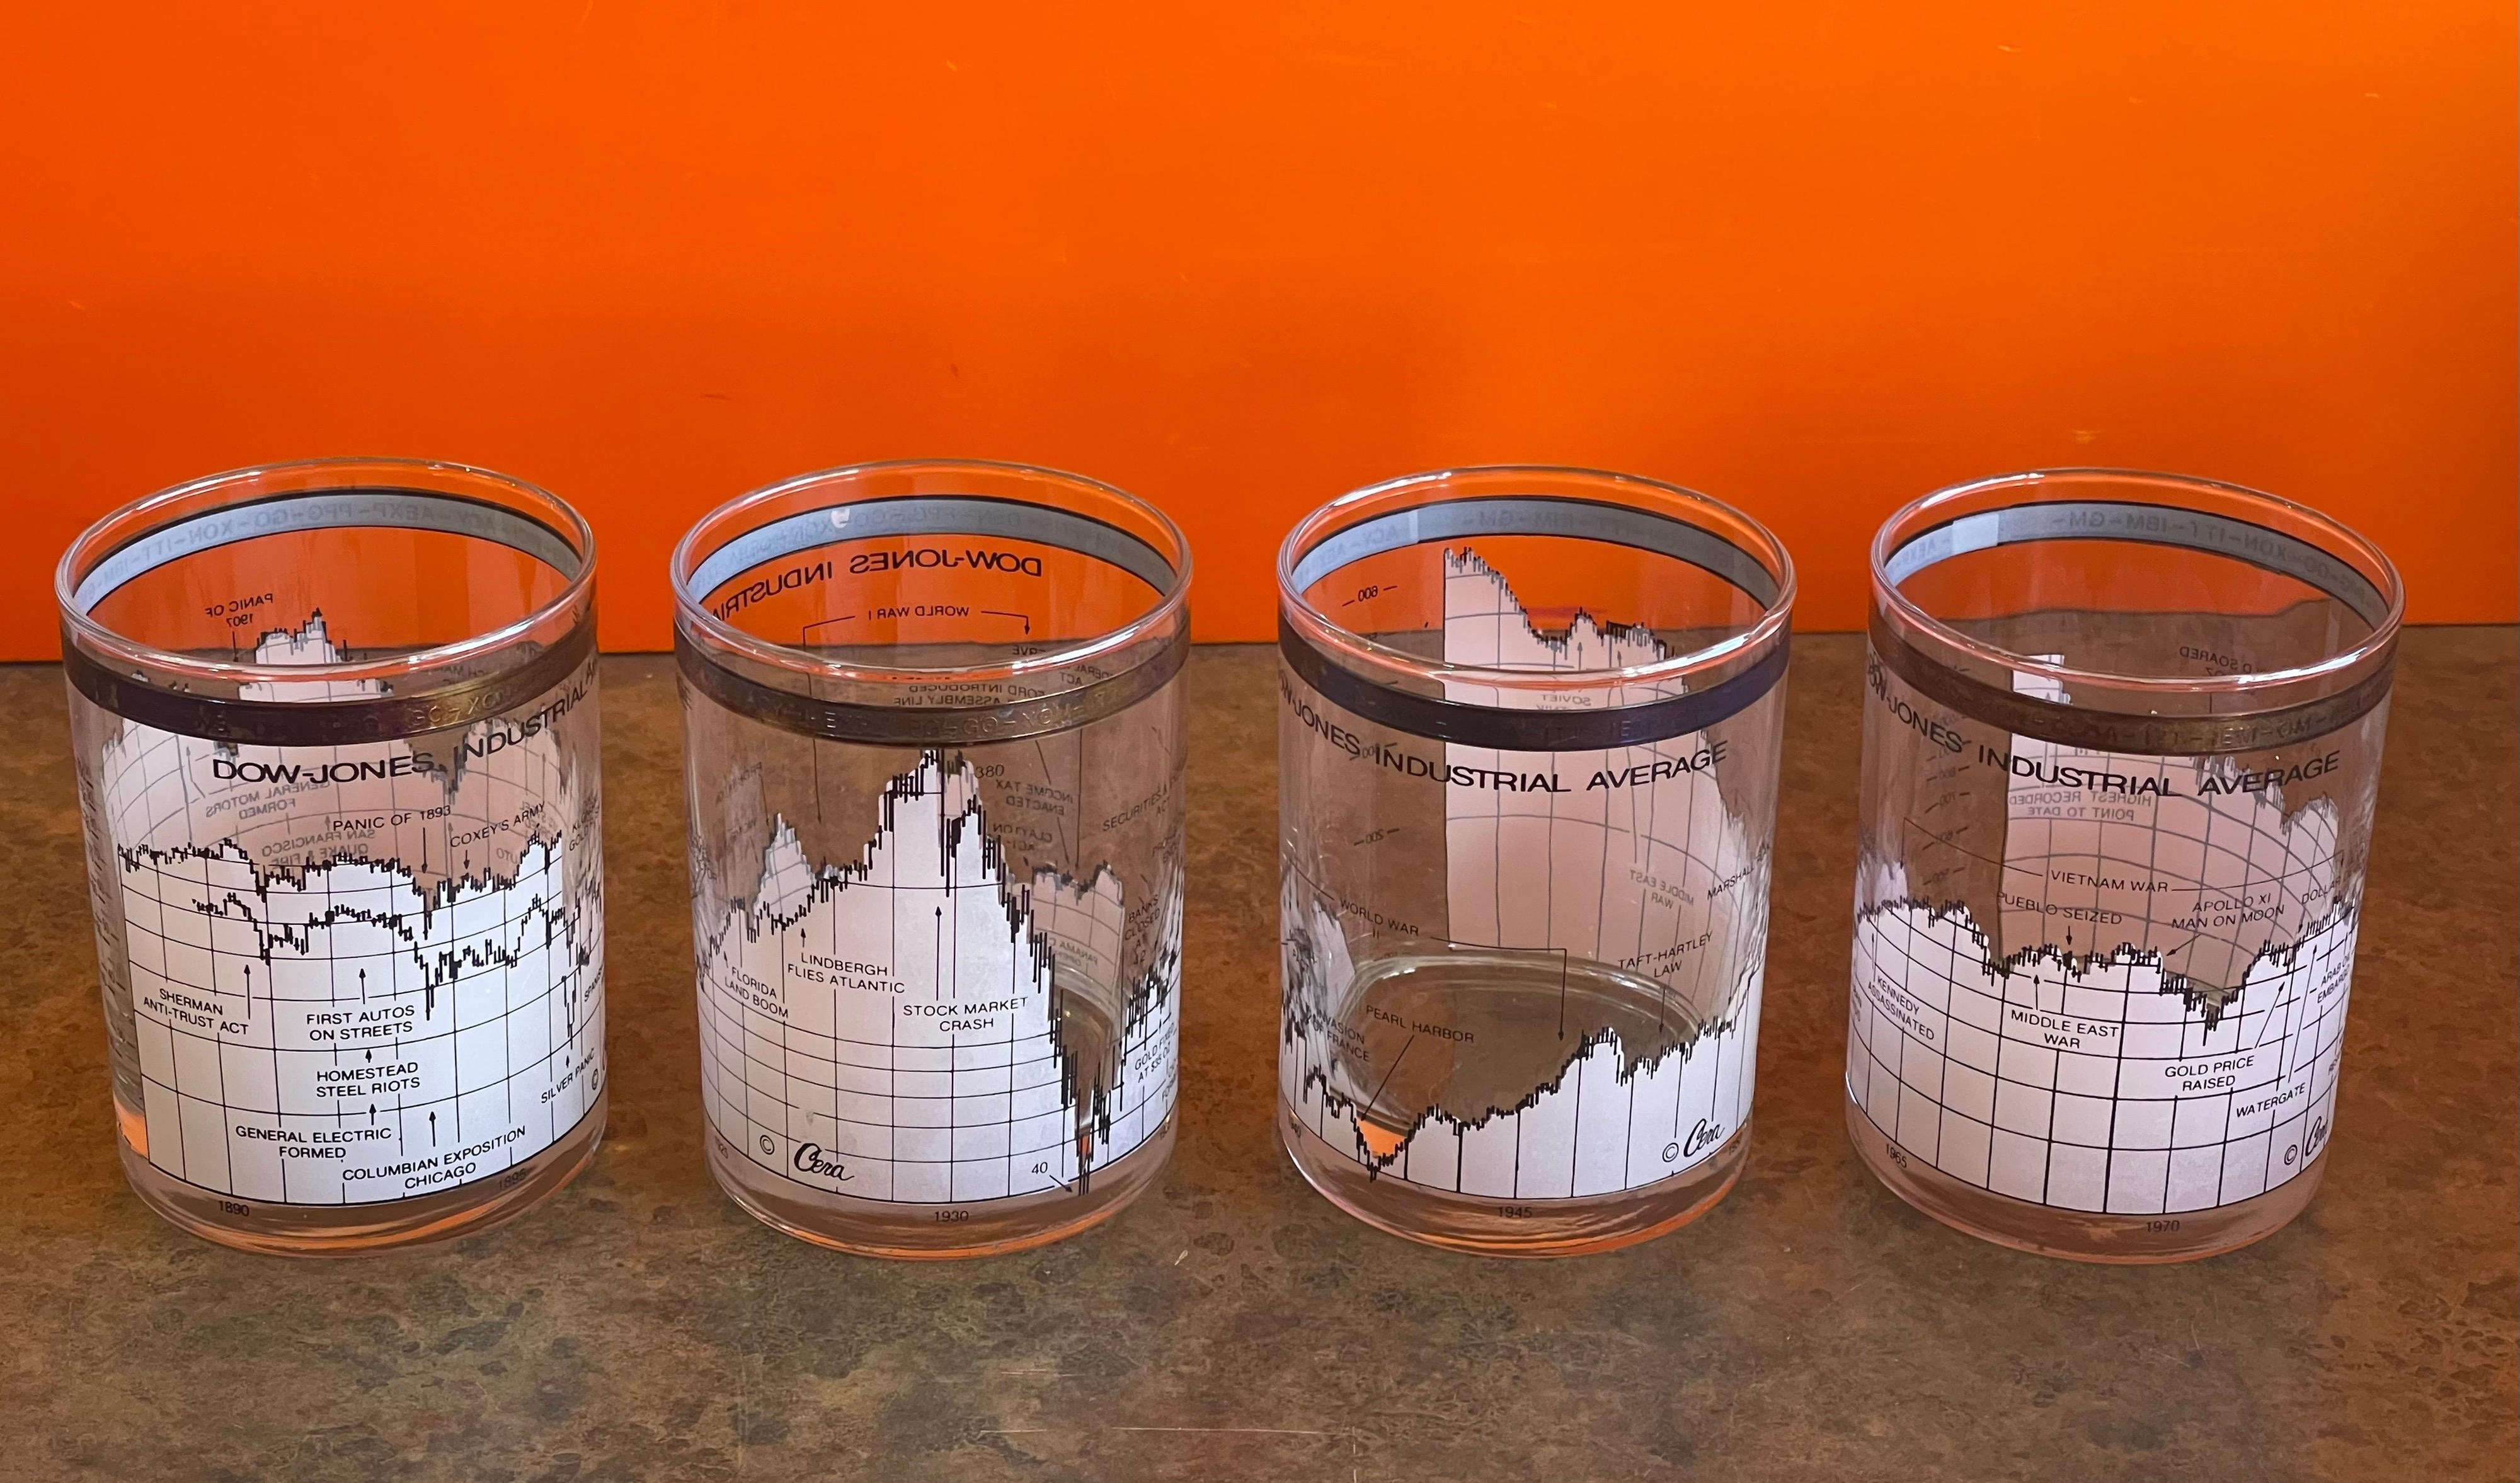 American Set of Four Stock Market / Wall Street / Dow Jones / Cocktail Glasses by Cera